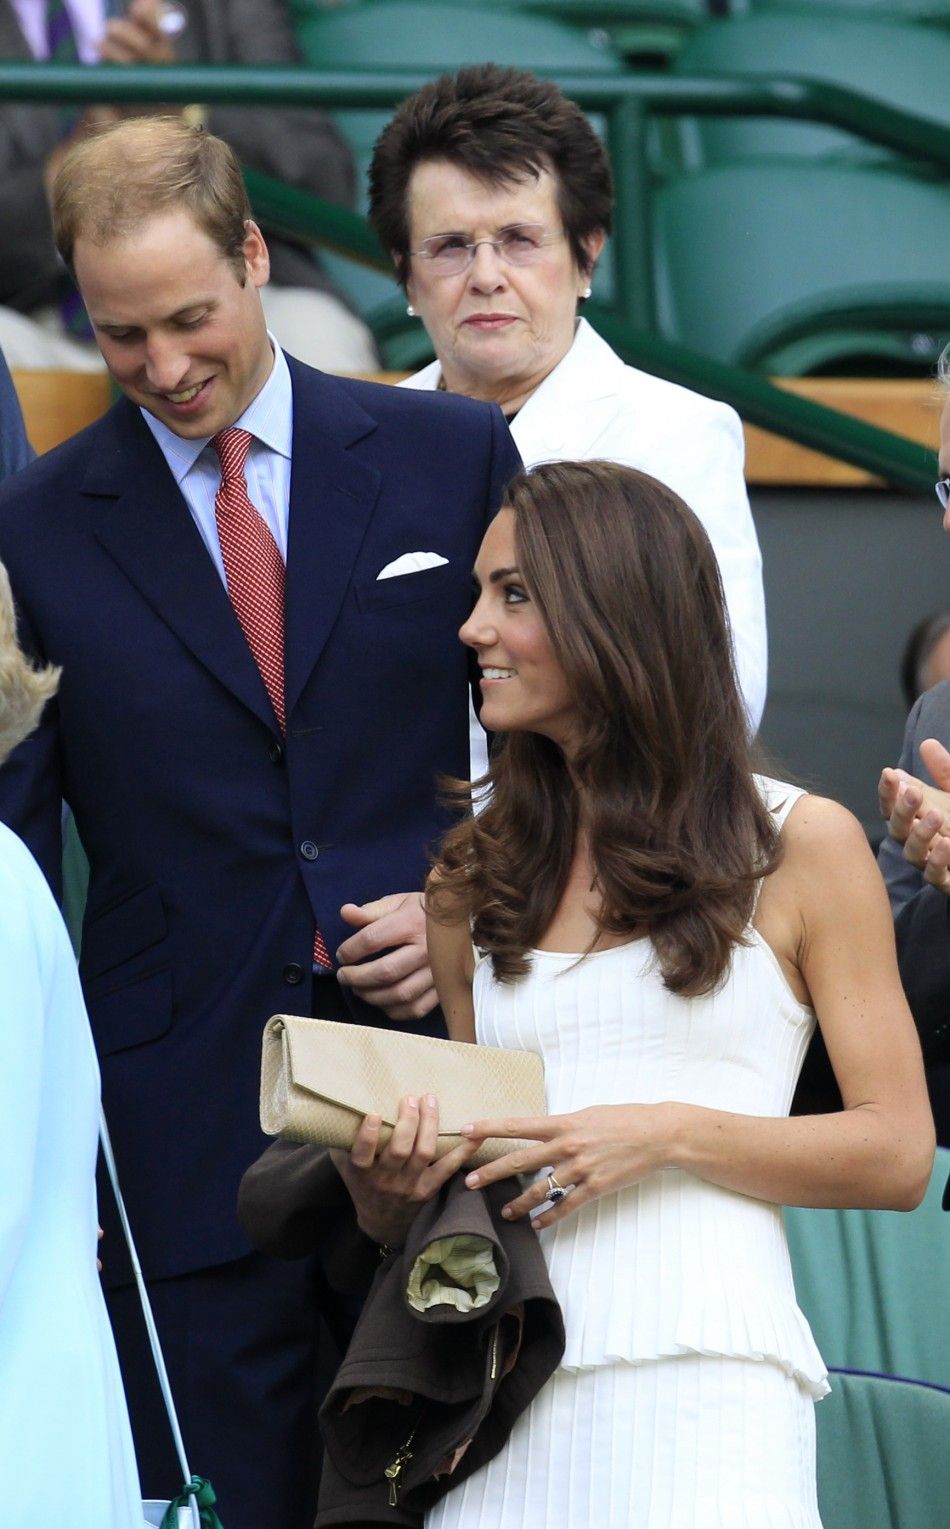 Britain039s Catherine, Duchess of Cambridge R arrives on Centre Court with her husband Prince William L, for the match between Andy Murray of Britain and Richard Gasquet of France at the Wimbledon tennis championships in London June 27, 2011.